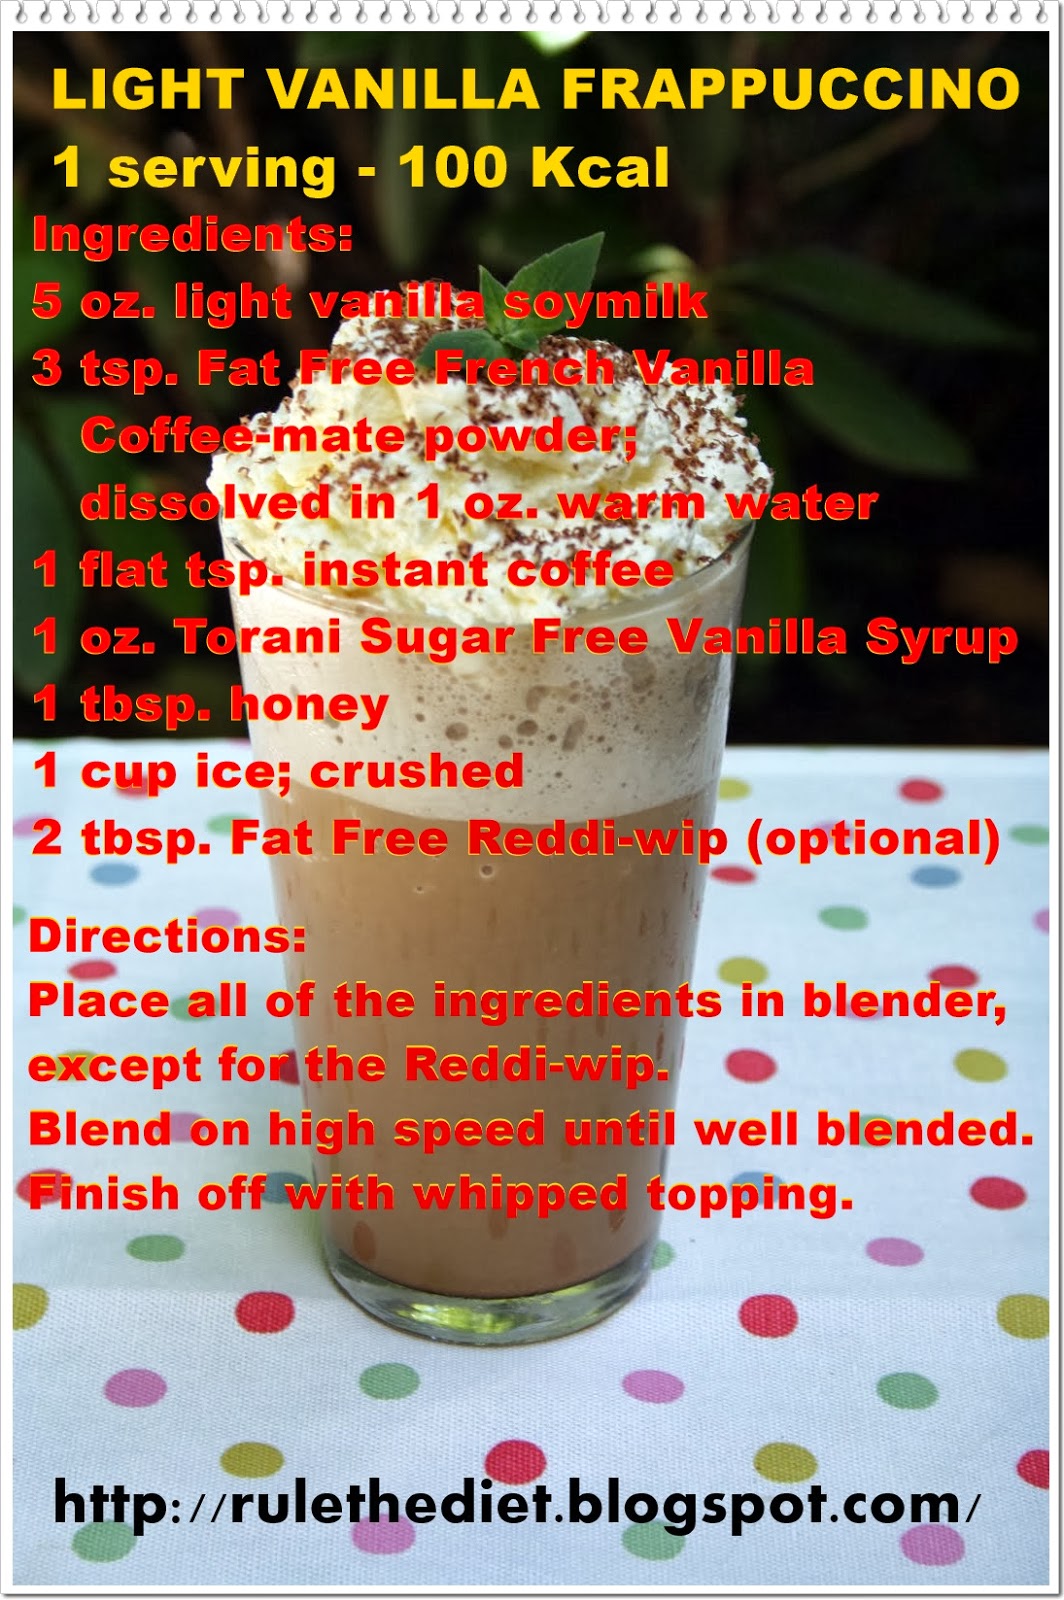 weight loss for a healthy lifestyle: LIGHT VANILLA FRAPPUCCINO!!!